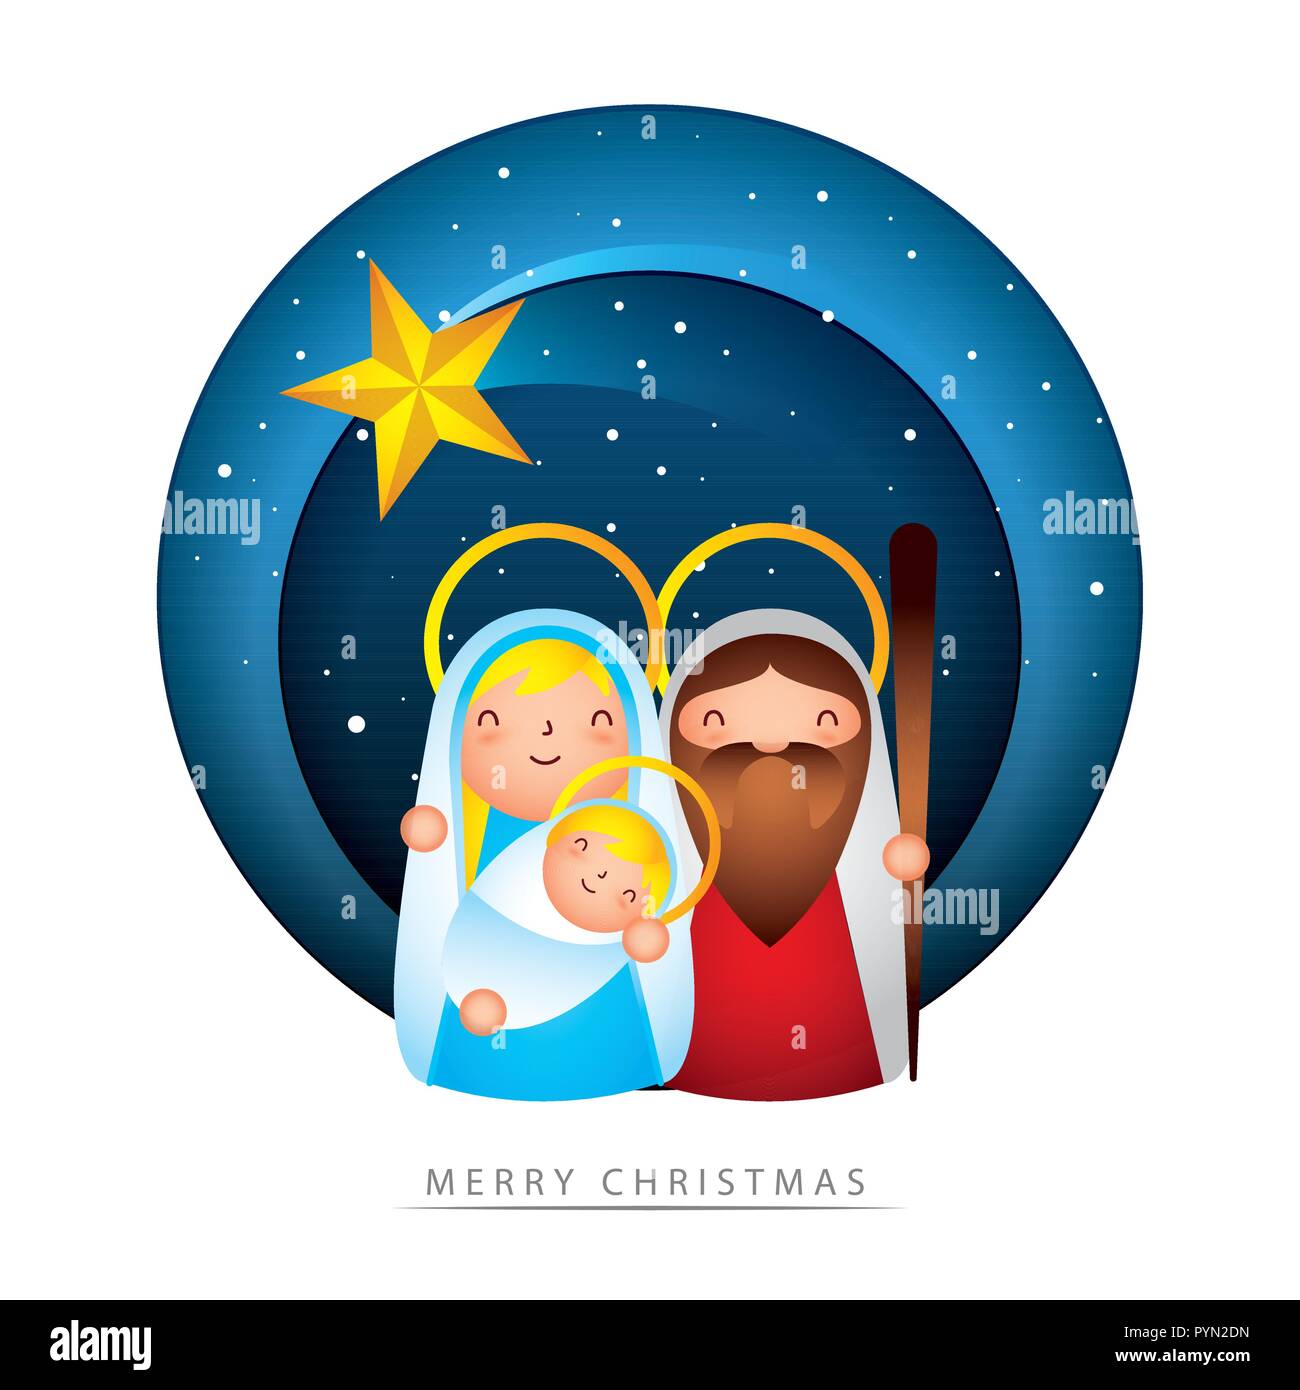 merry christmas related Stock Vector